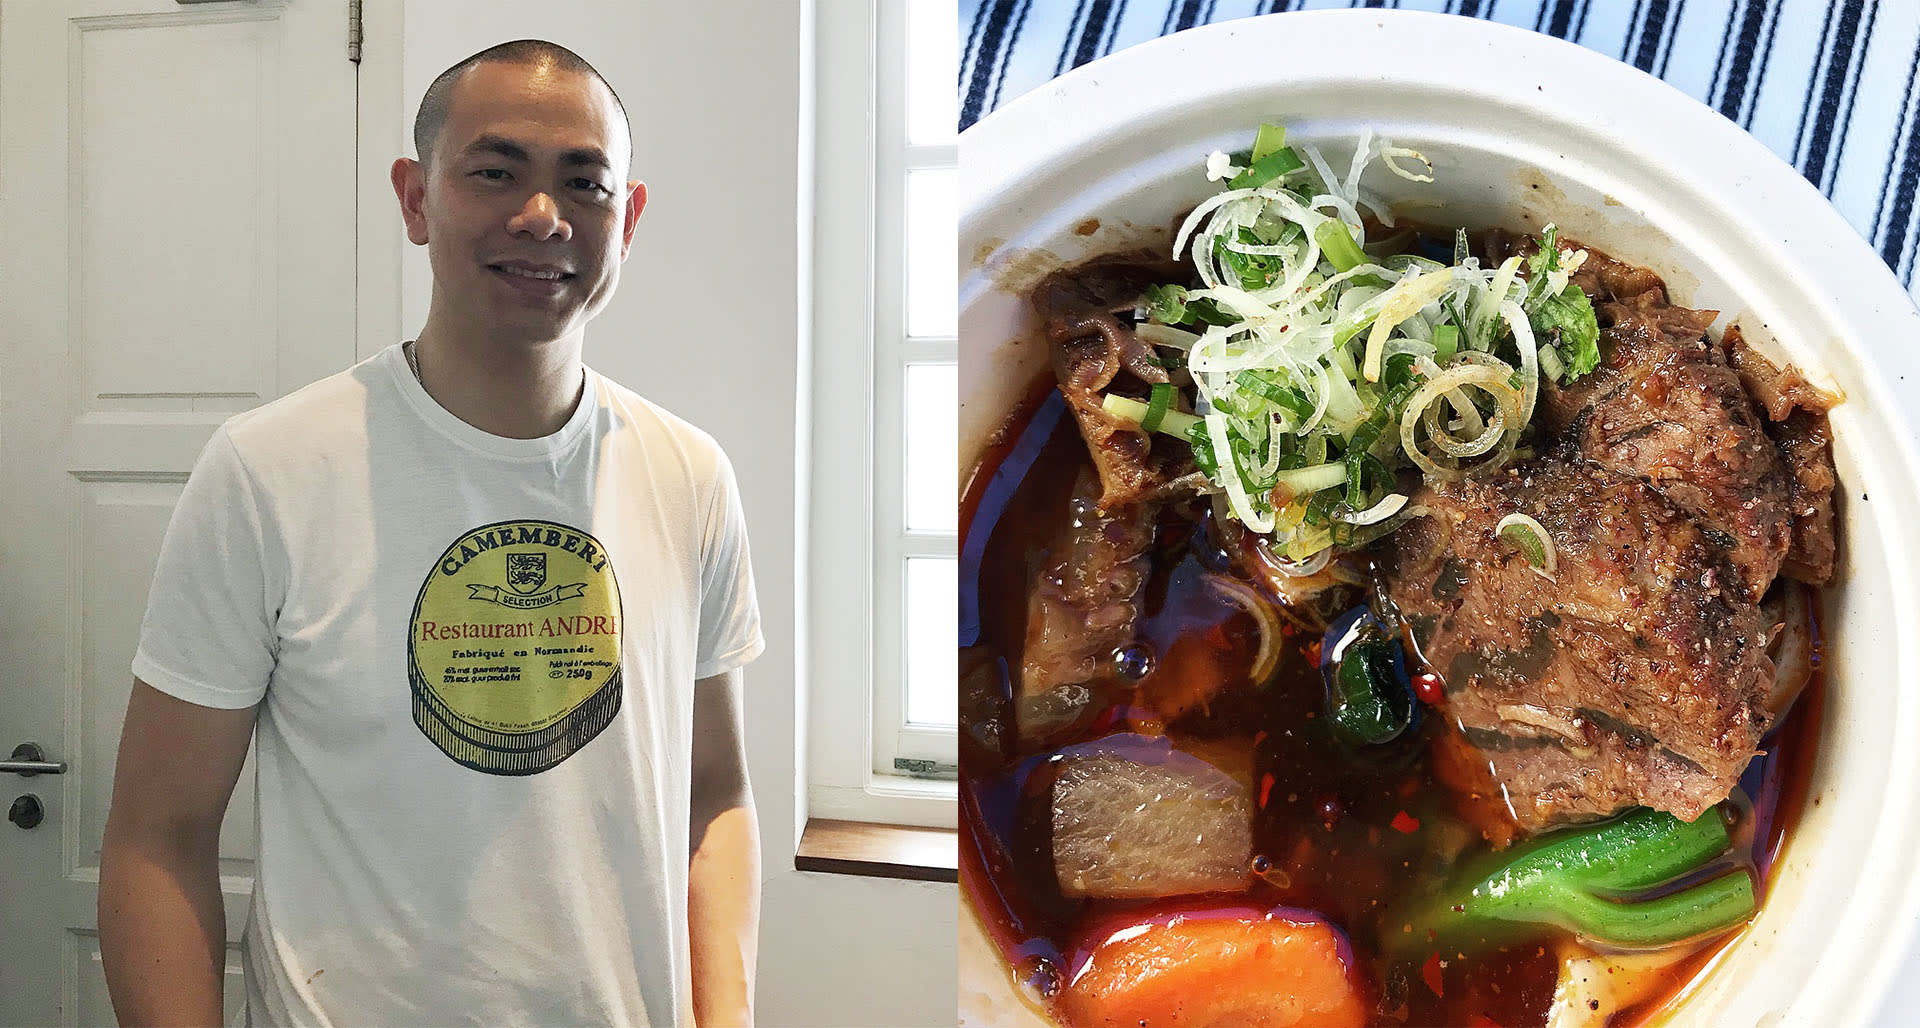 Chef Andre Chiang Closes Restaurant Andre And Says His Future Plans May Include "Selling Beef Noodles"